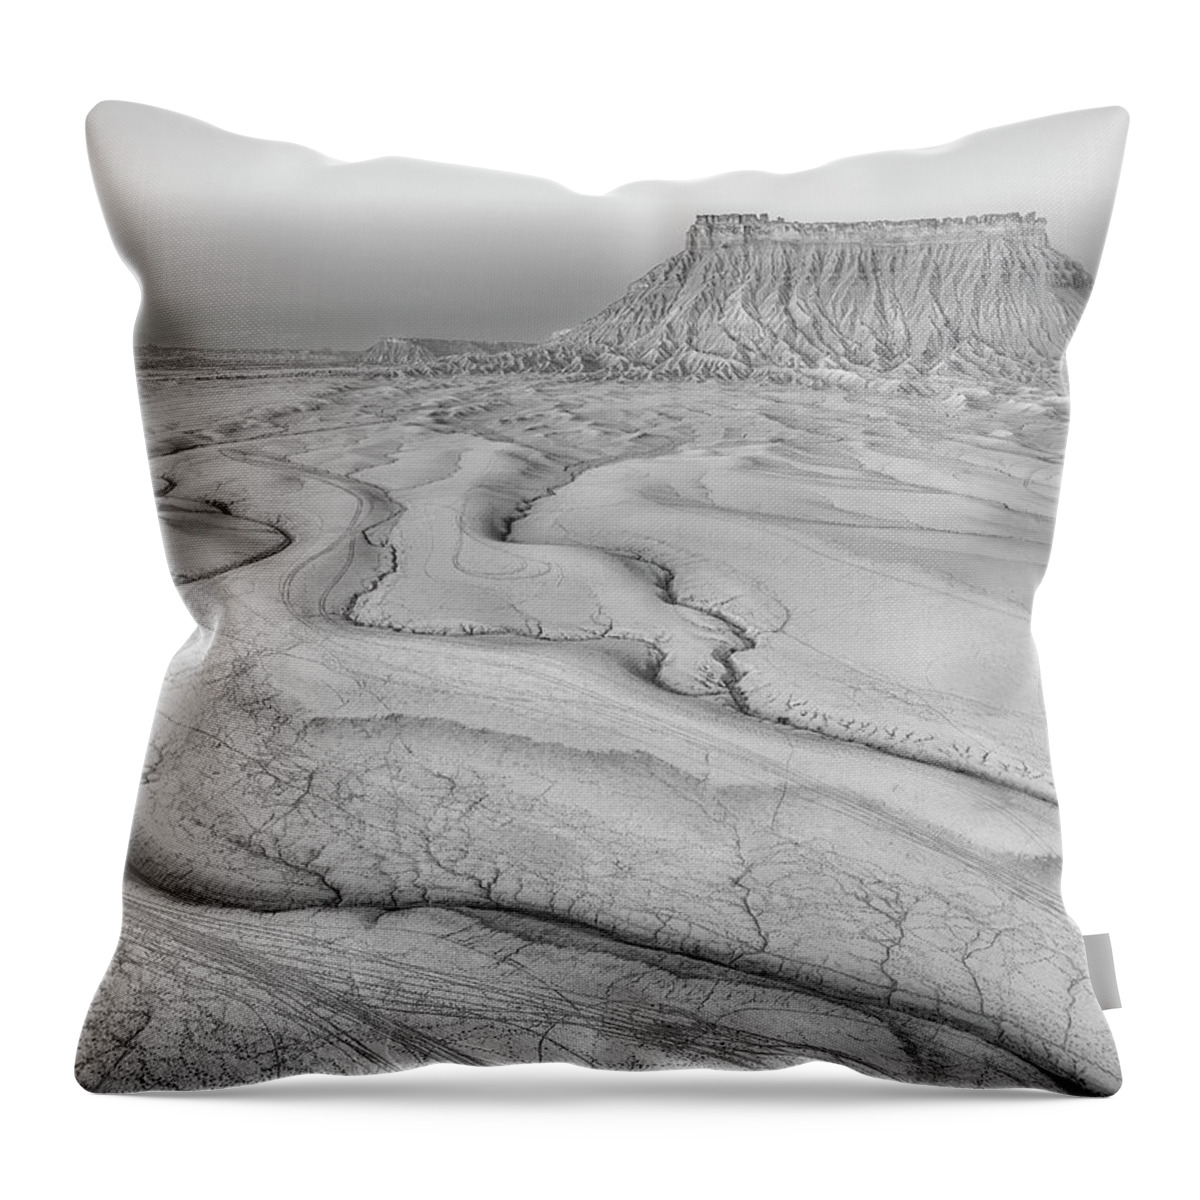 Factory Butte Throw Pillow featuring the photograph Factory Butte Utah by Susan Candelario